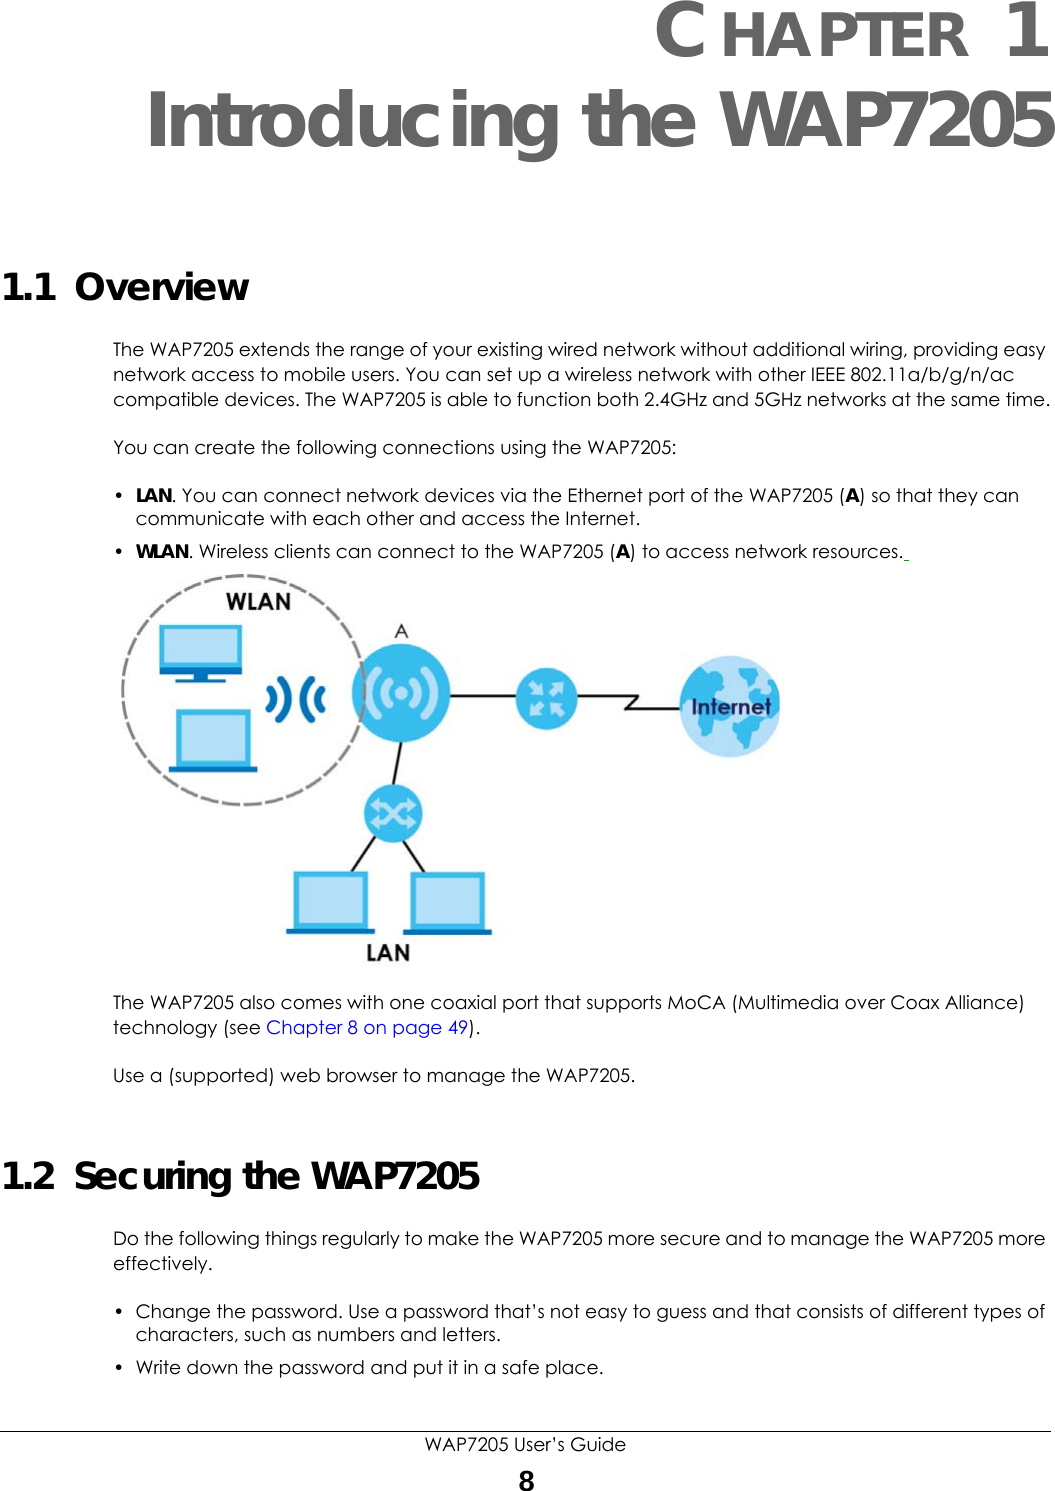 WAP7205 User’s Guide8CHAPTER 1Introducing the WAP72051.1  OverviewThe WAP7205 extends the range of your existing wired network without additional wiring, providing easy network access to mobile users. You can set up a wireless network with other IEEE 802.11a/b/g/n/ac compatible devices. The WAP7205 is able to function both 2.4GHz and 5GHz networks at the same time.You can create the following connections using the WAP7205:•LAN. You can connect network devices via the Ethernet port of the WAP7205 (A) so that they can communicate with each other and access the Internet.•WLAN. Wireless clients can connect to the WAP7205 (A) to access network resources. The WAP7205 also comes with one coaxial port that supports MoCA (Multimedia over Coax Alliance) technology (see Chapter 8 on page 49). Use a (supported) web browser to manage the WAP7205.1.2  Securing the WAP7205Do the following things regularly to make the WAP7205 more secure and to manage the WAP7205 more effectively.• Change the password. Use a password that’s not easy to guess and that consists of different types of characters, such as numbers and letters.• Write down the password and put it in a safe place.